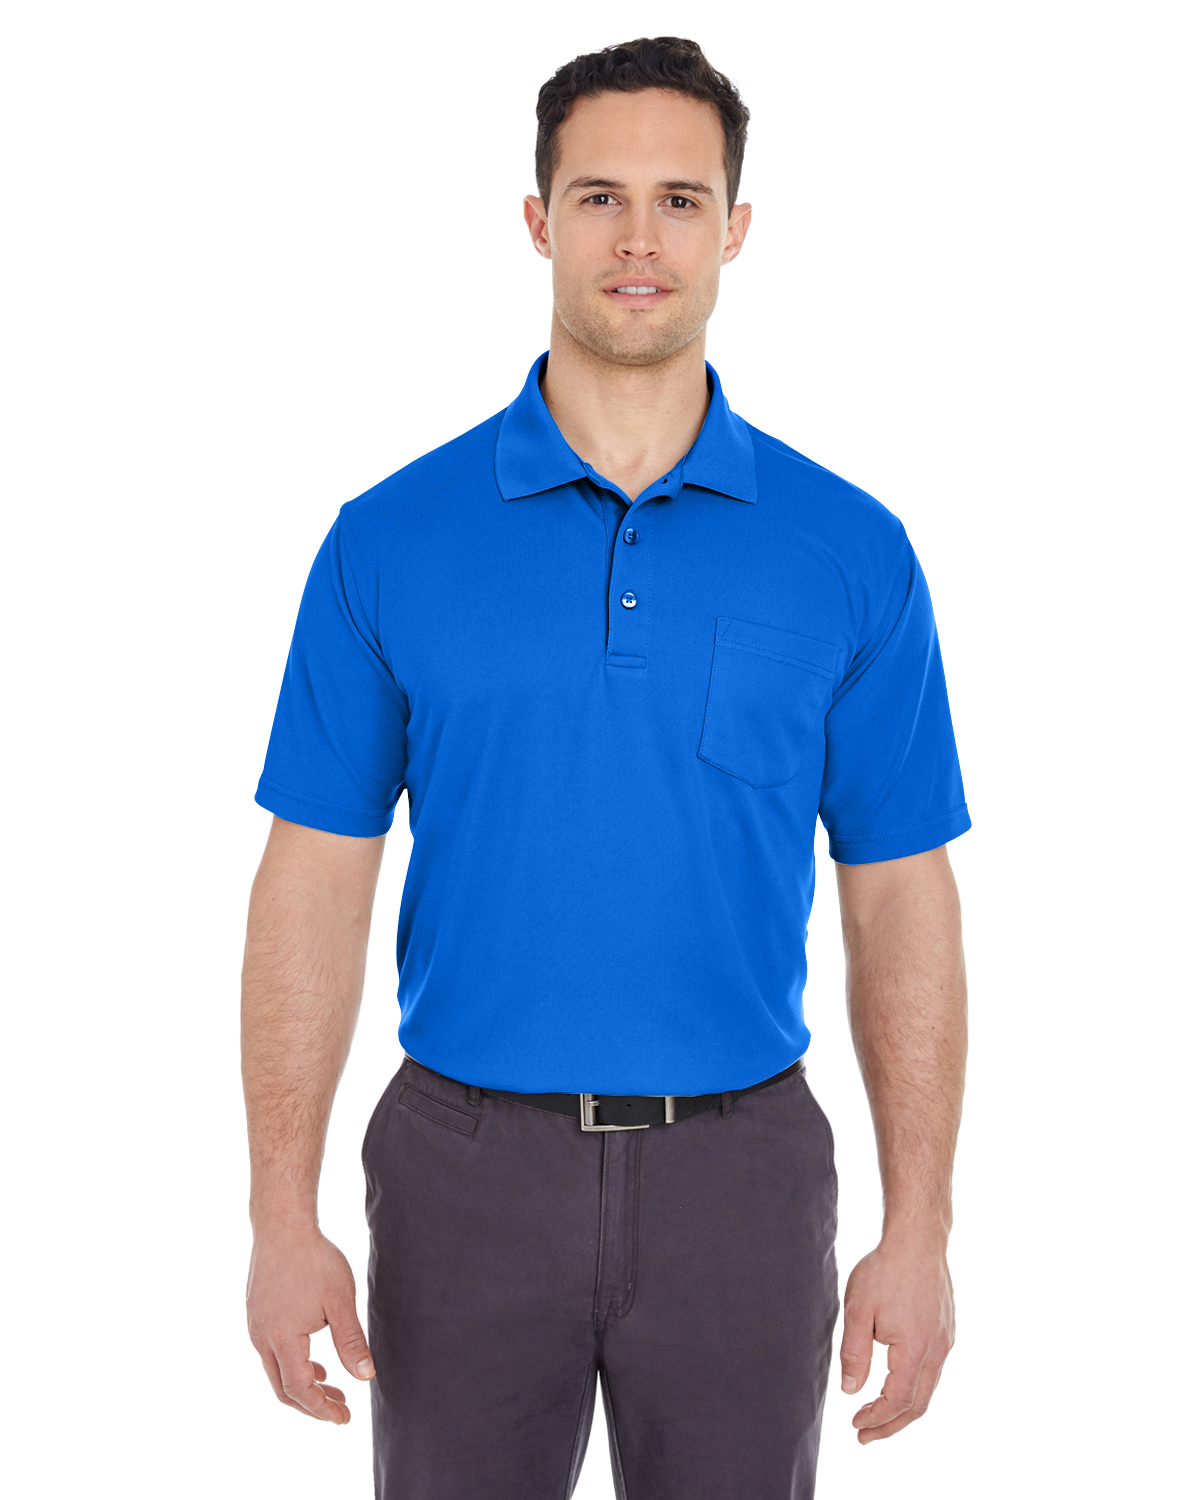 Ultra Club 8210P - Adult Cool & Dry Mesh Pique Polo with Pocket